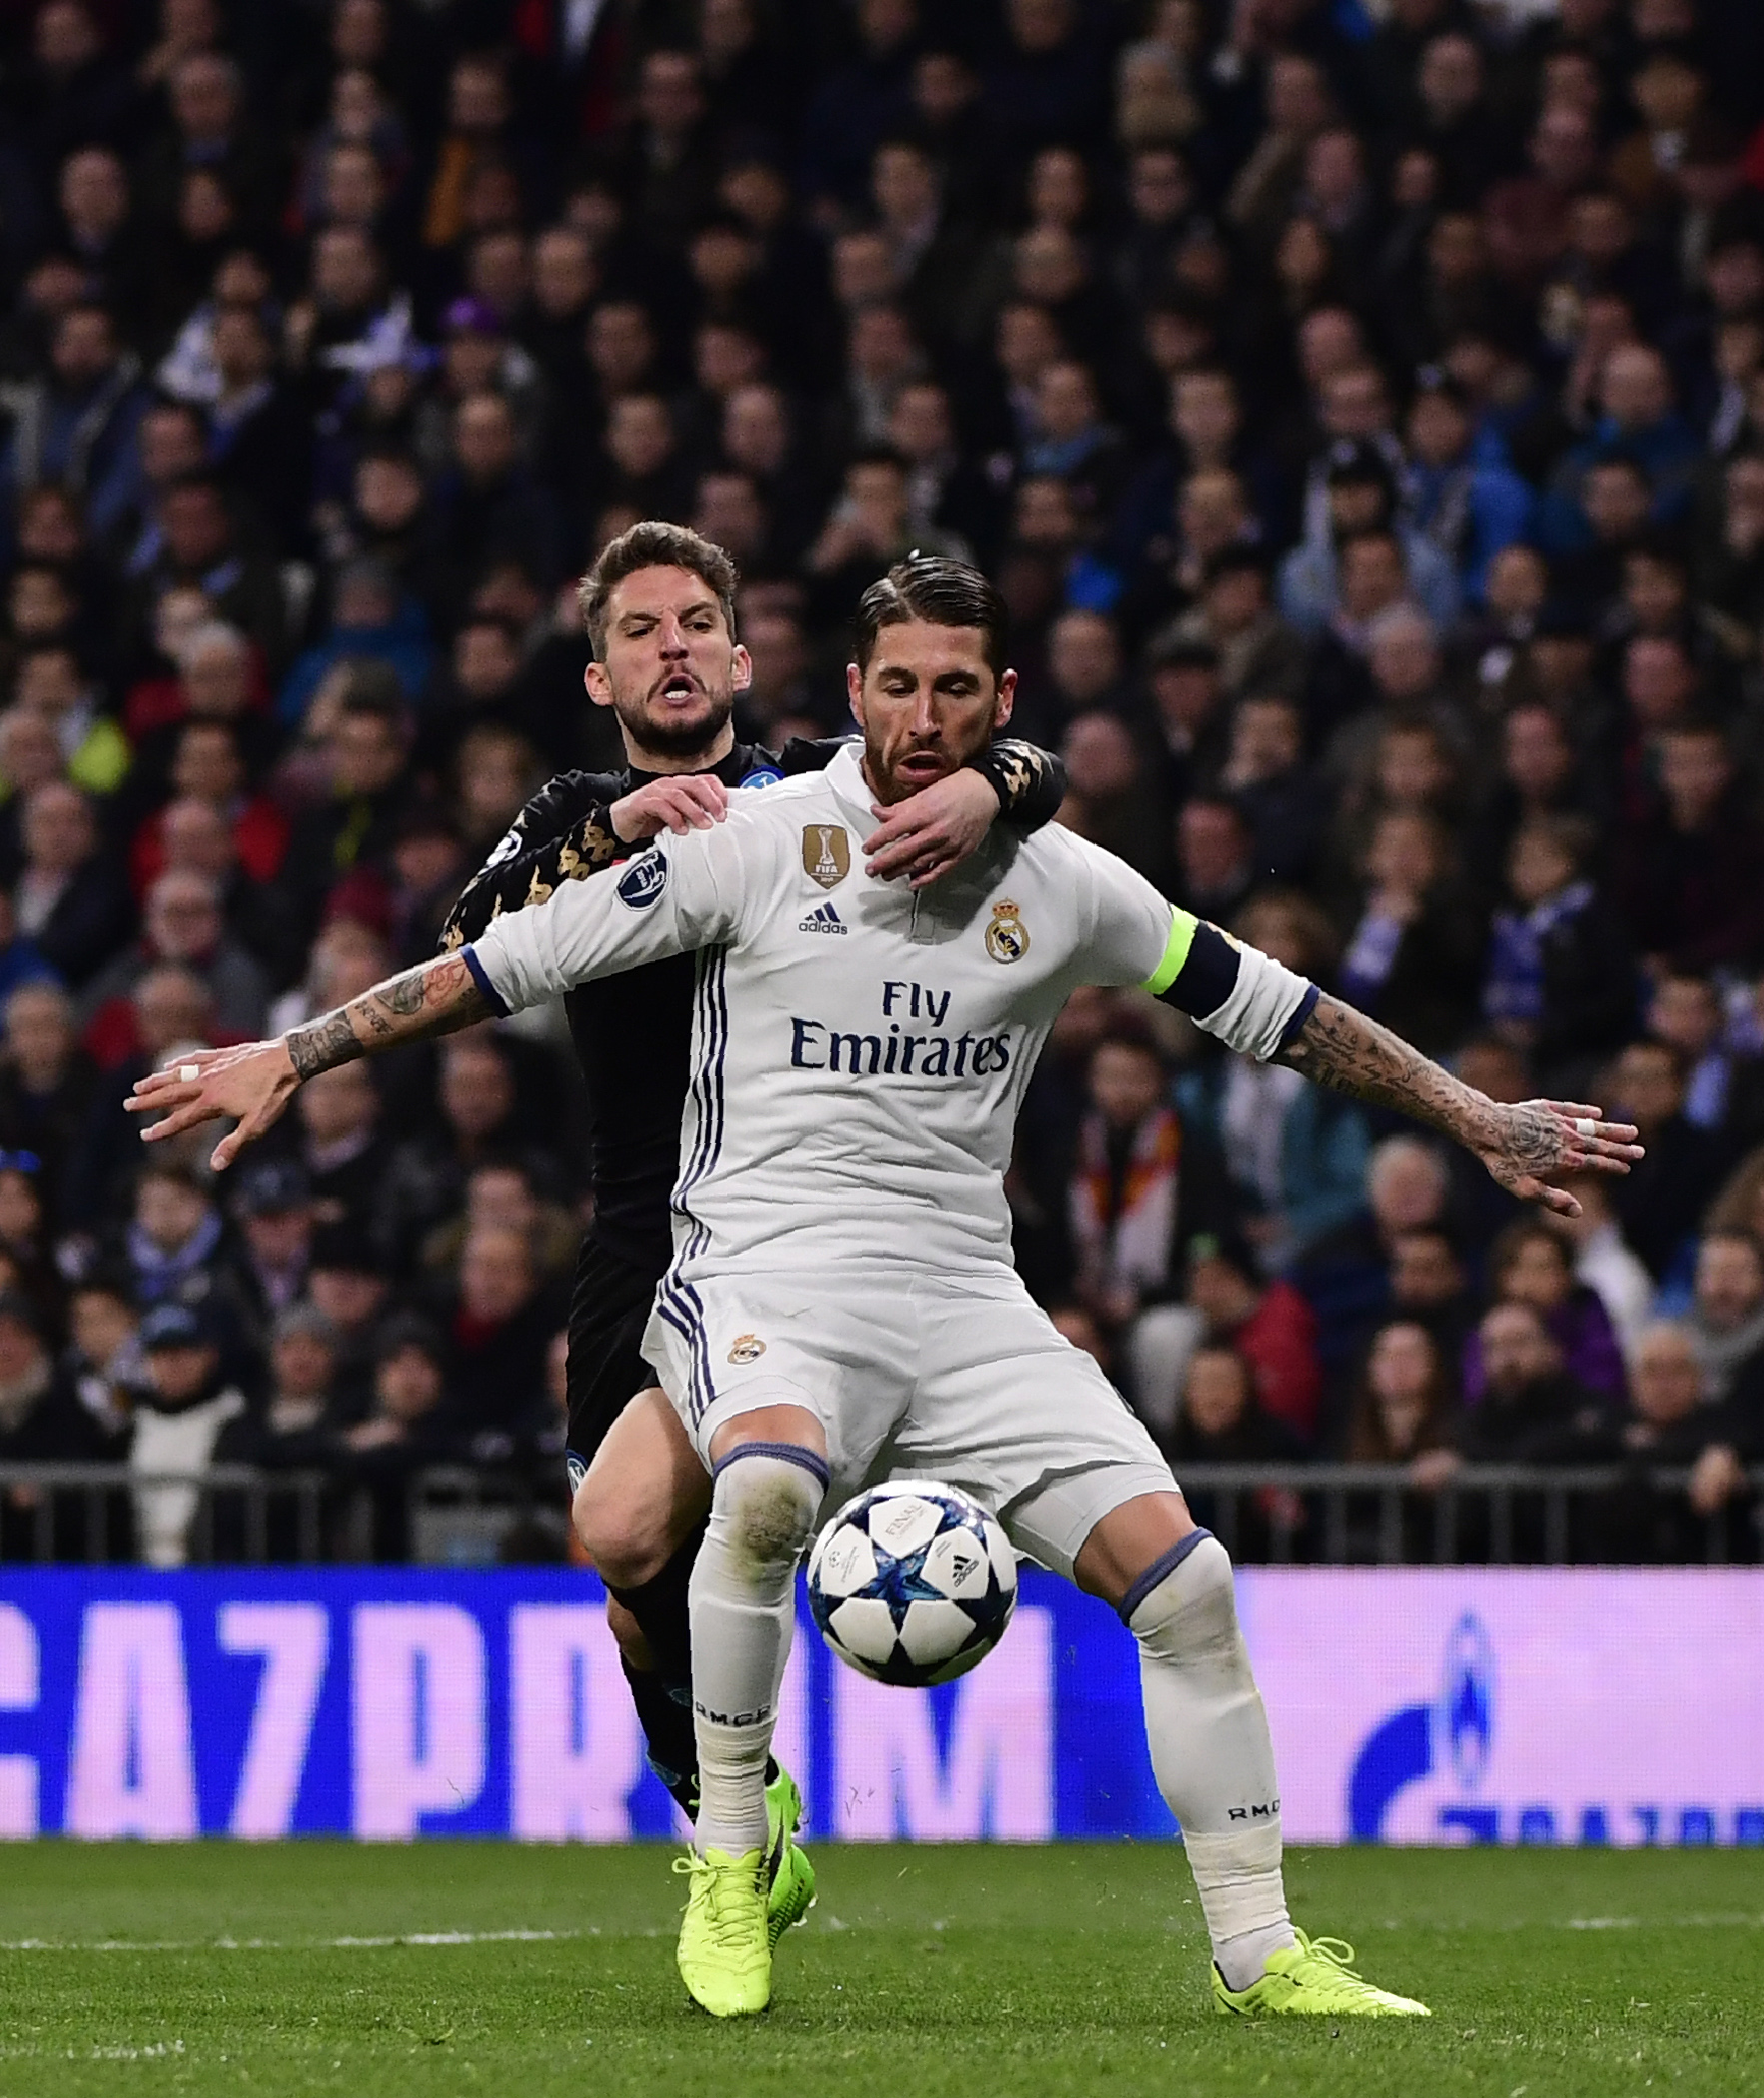 Napoli's forward from Belgium Dries Mertens (L) vies wth Real Madrid's defender Sergio Ramos during the UEFA Champions League round of 16 first leg football match Real Madrid CF vs SSC Napoli at the Santiago Bernabeu stadium in Madrid on February 15, 2017. / AFP PHOTO / PIERRE-PHILIPPE MARCOU